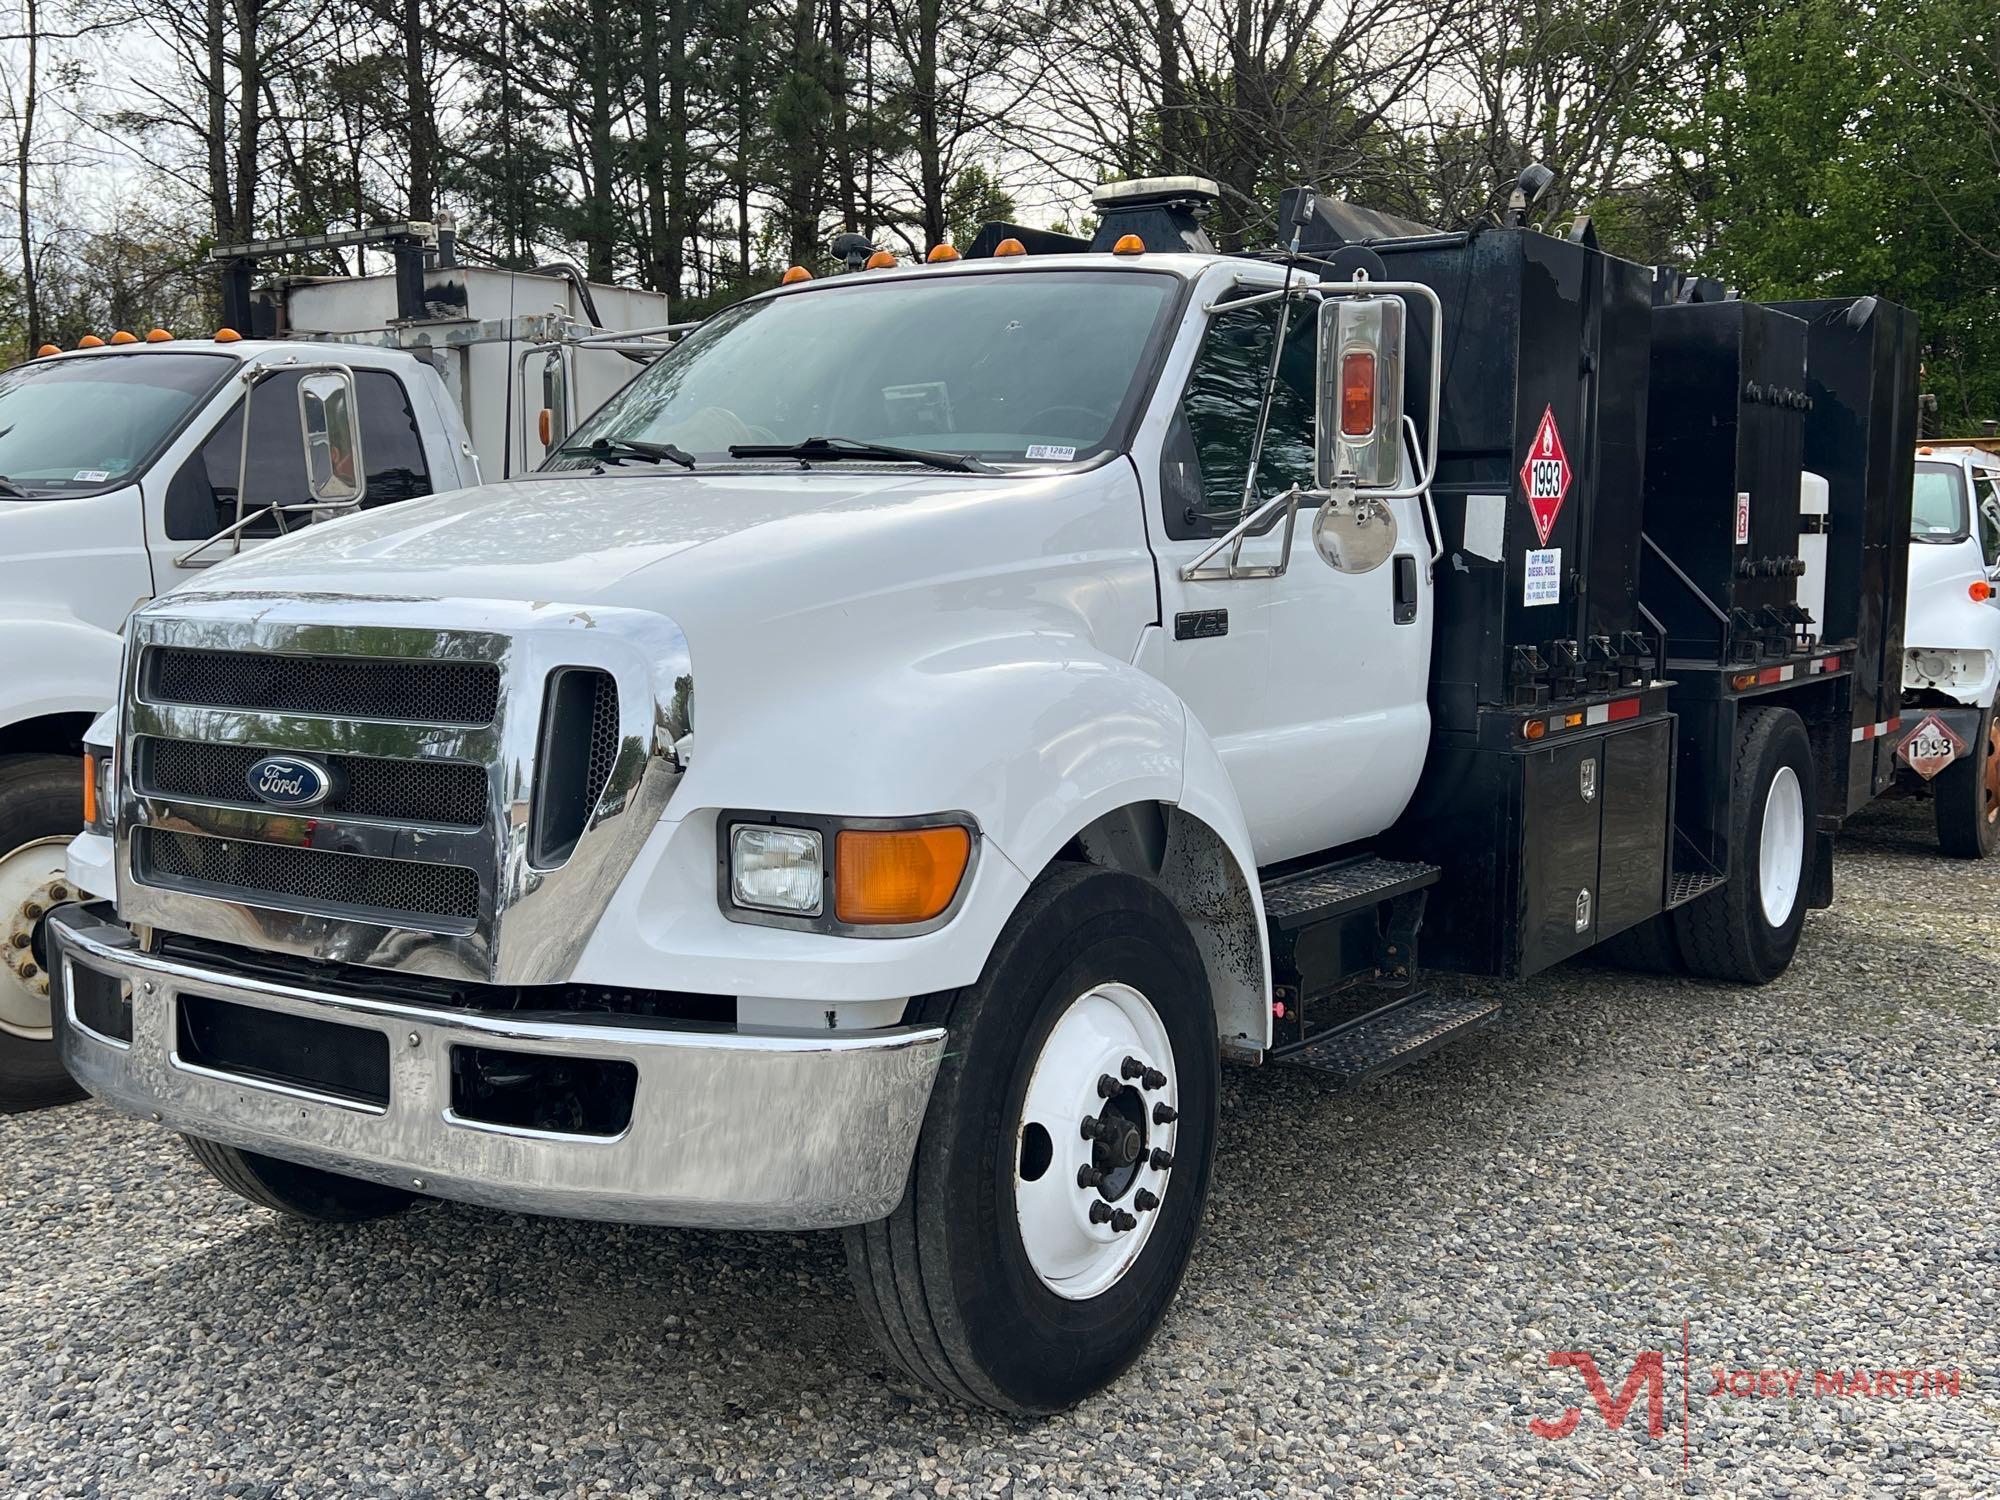 2005 FORD F750 XL SUPER DUTY S/A FUEL AND LUBE TRUCK